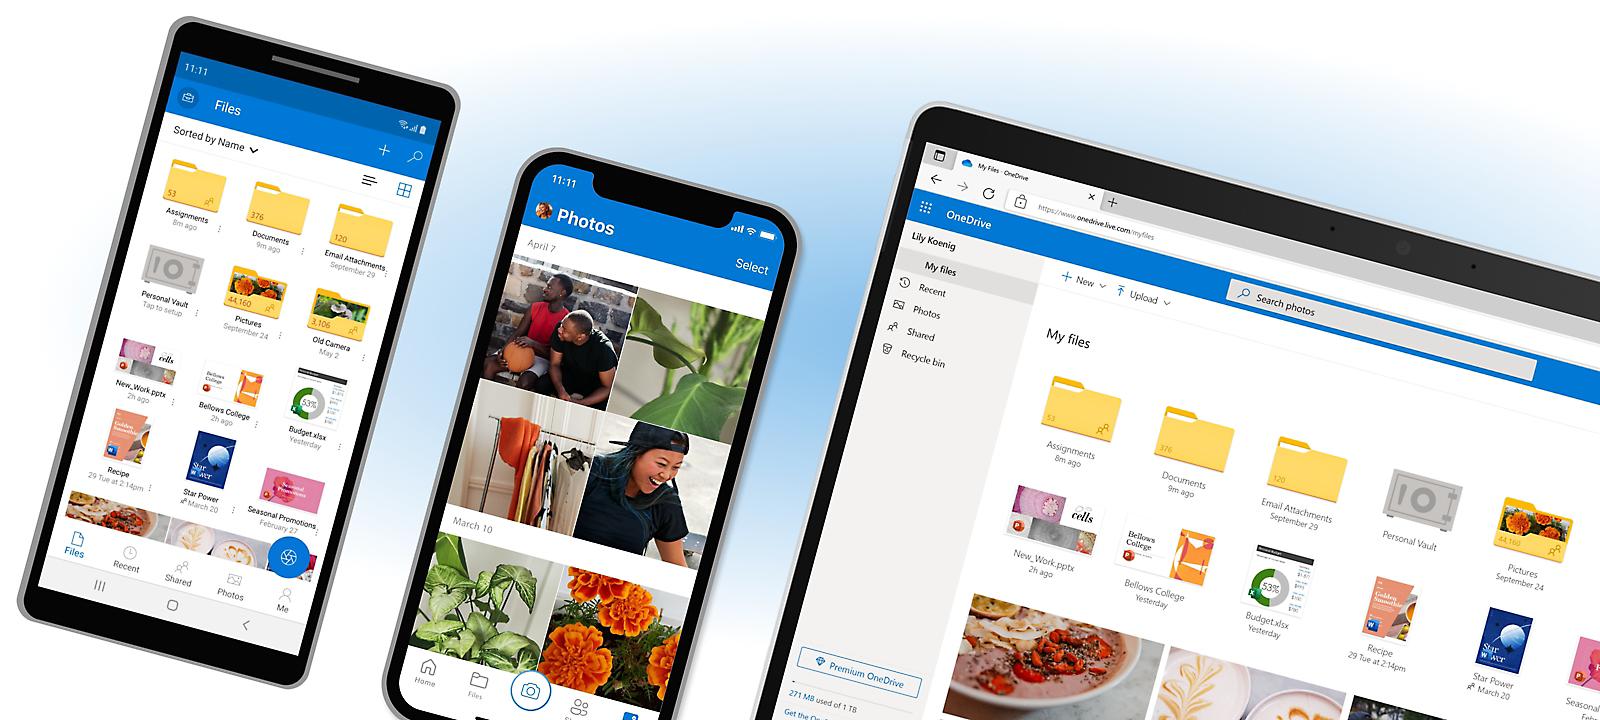 Two mobile phones and a desktop display showing files and photos saved in OneDrive organized by date and story. - Microsoft 365